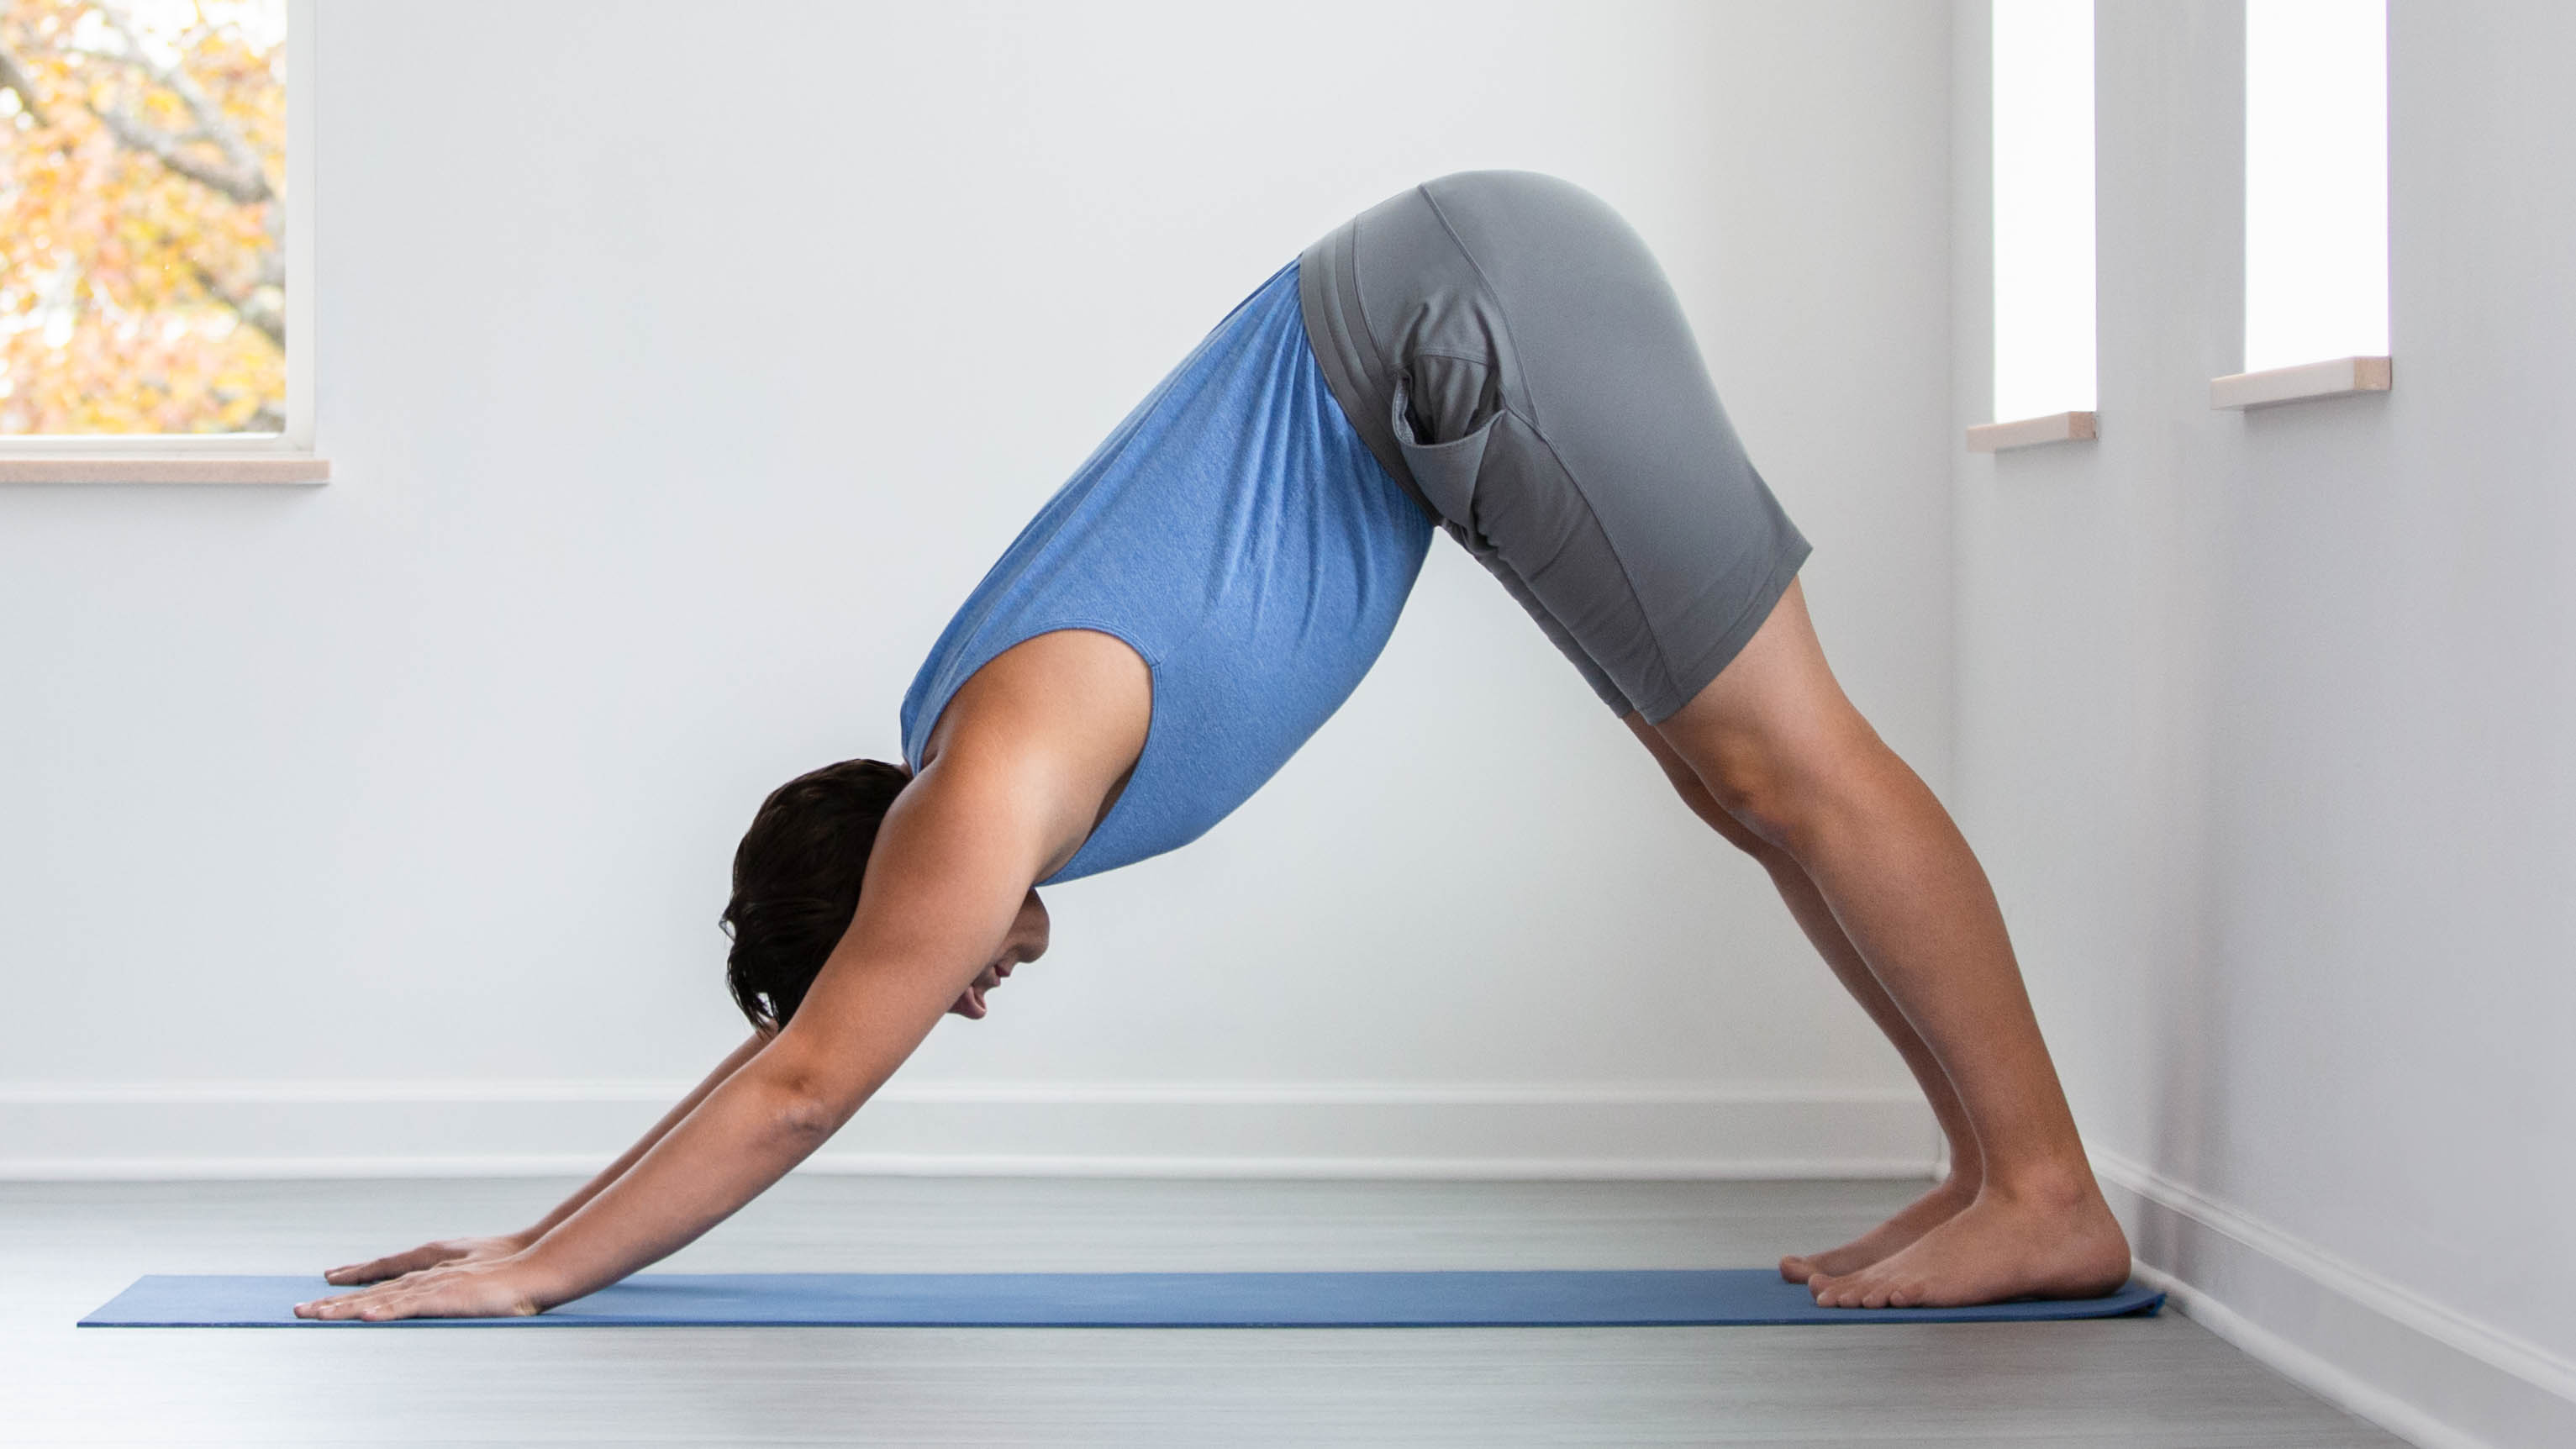 How to Select Main Postures and Compensation Poses to Develop Your Own Yoga  Routine - dummies